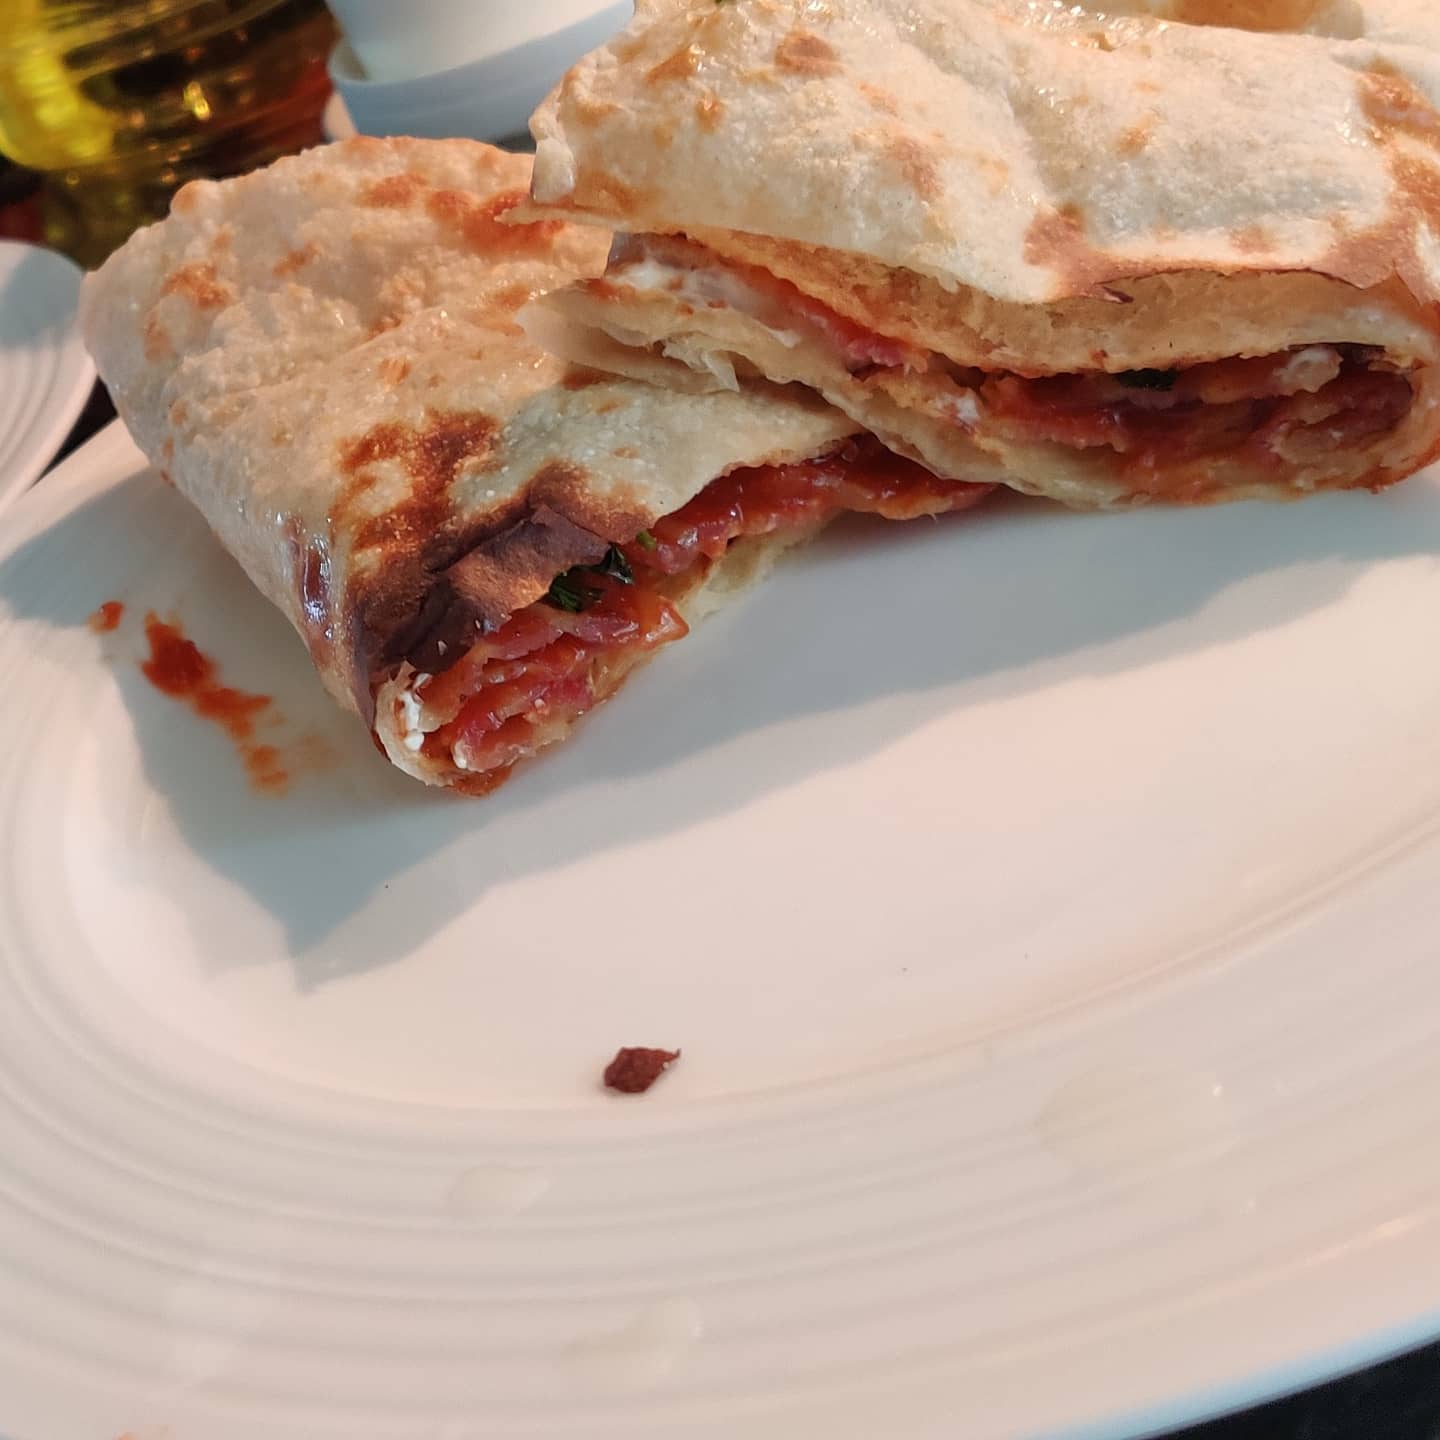 Sorry, more food stuff – this is to send my condolences to anyone NOT having a lovely @dishoom Bacon Naan Roll make-at-home kit right now (birthday treat from @hannahcot!). It is the tastiest thing ever, and I urge everyone to order one immediately. #omnomnom